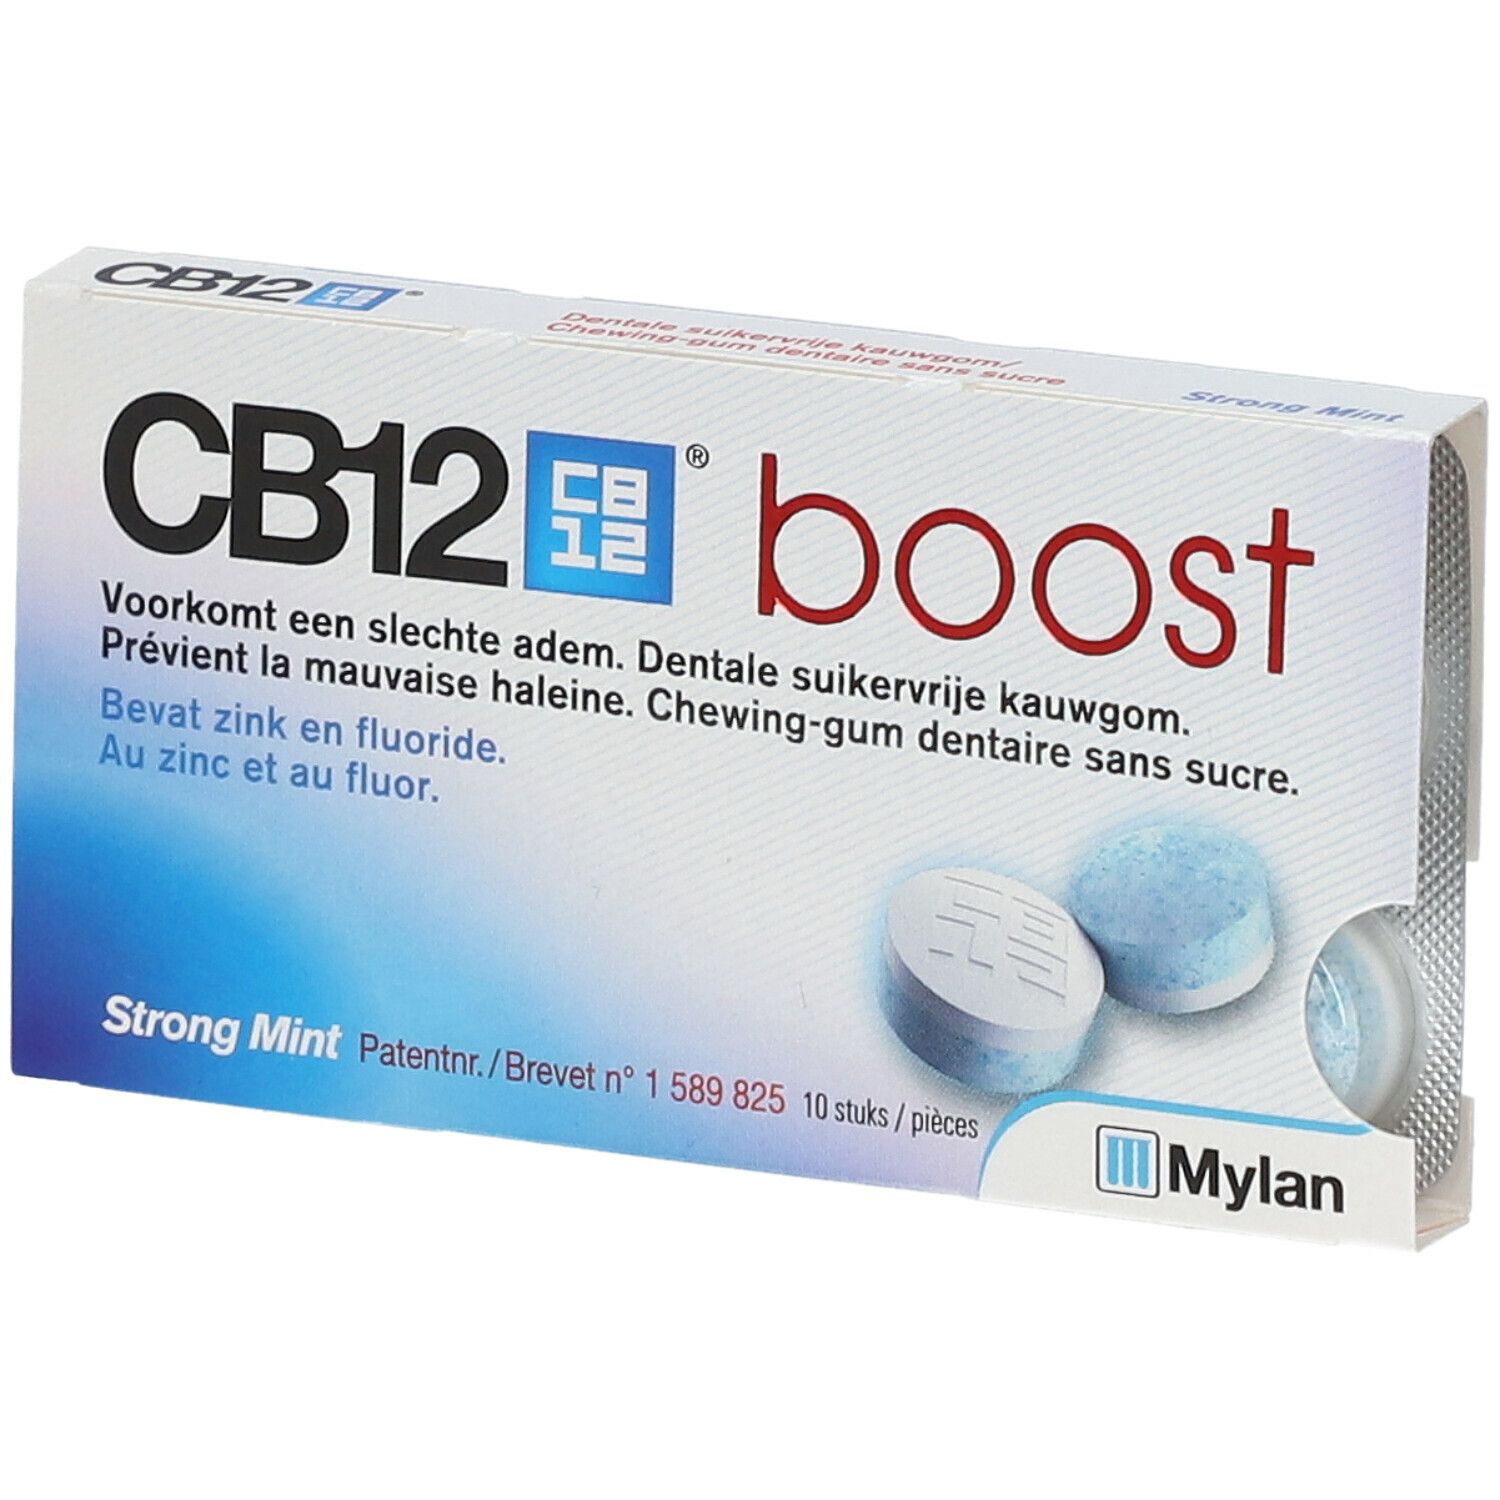 Image of CB12® boost Strong Mint